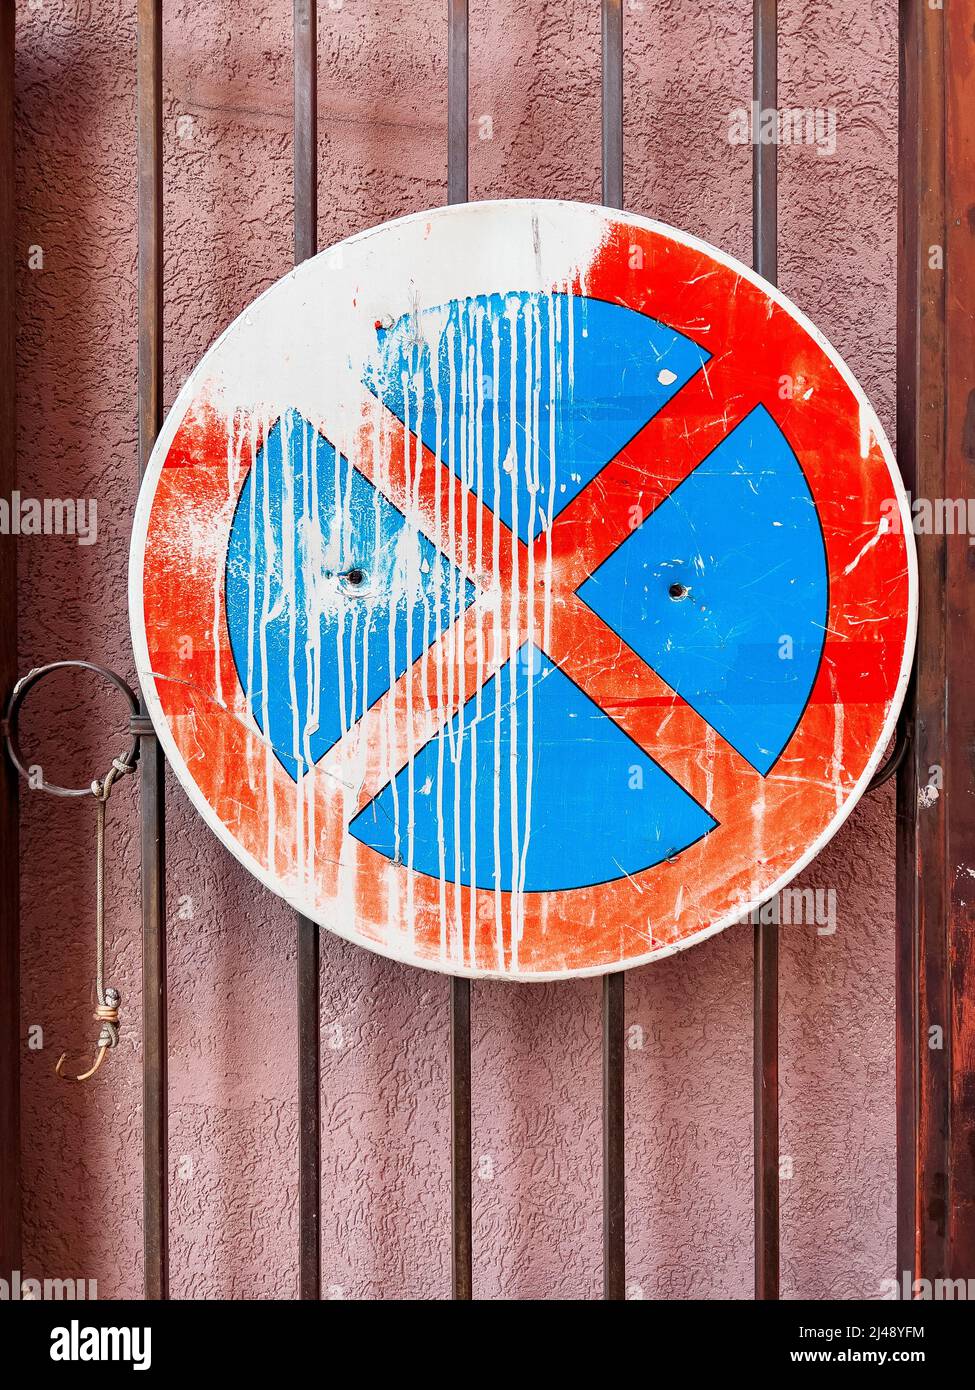 No stopping traffic sign with white paint spill mounted on the gate Stock Photo